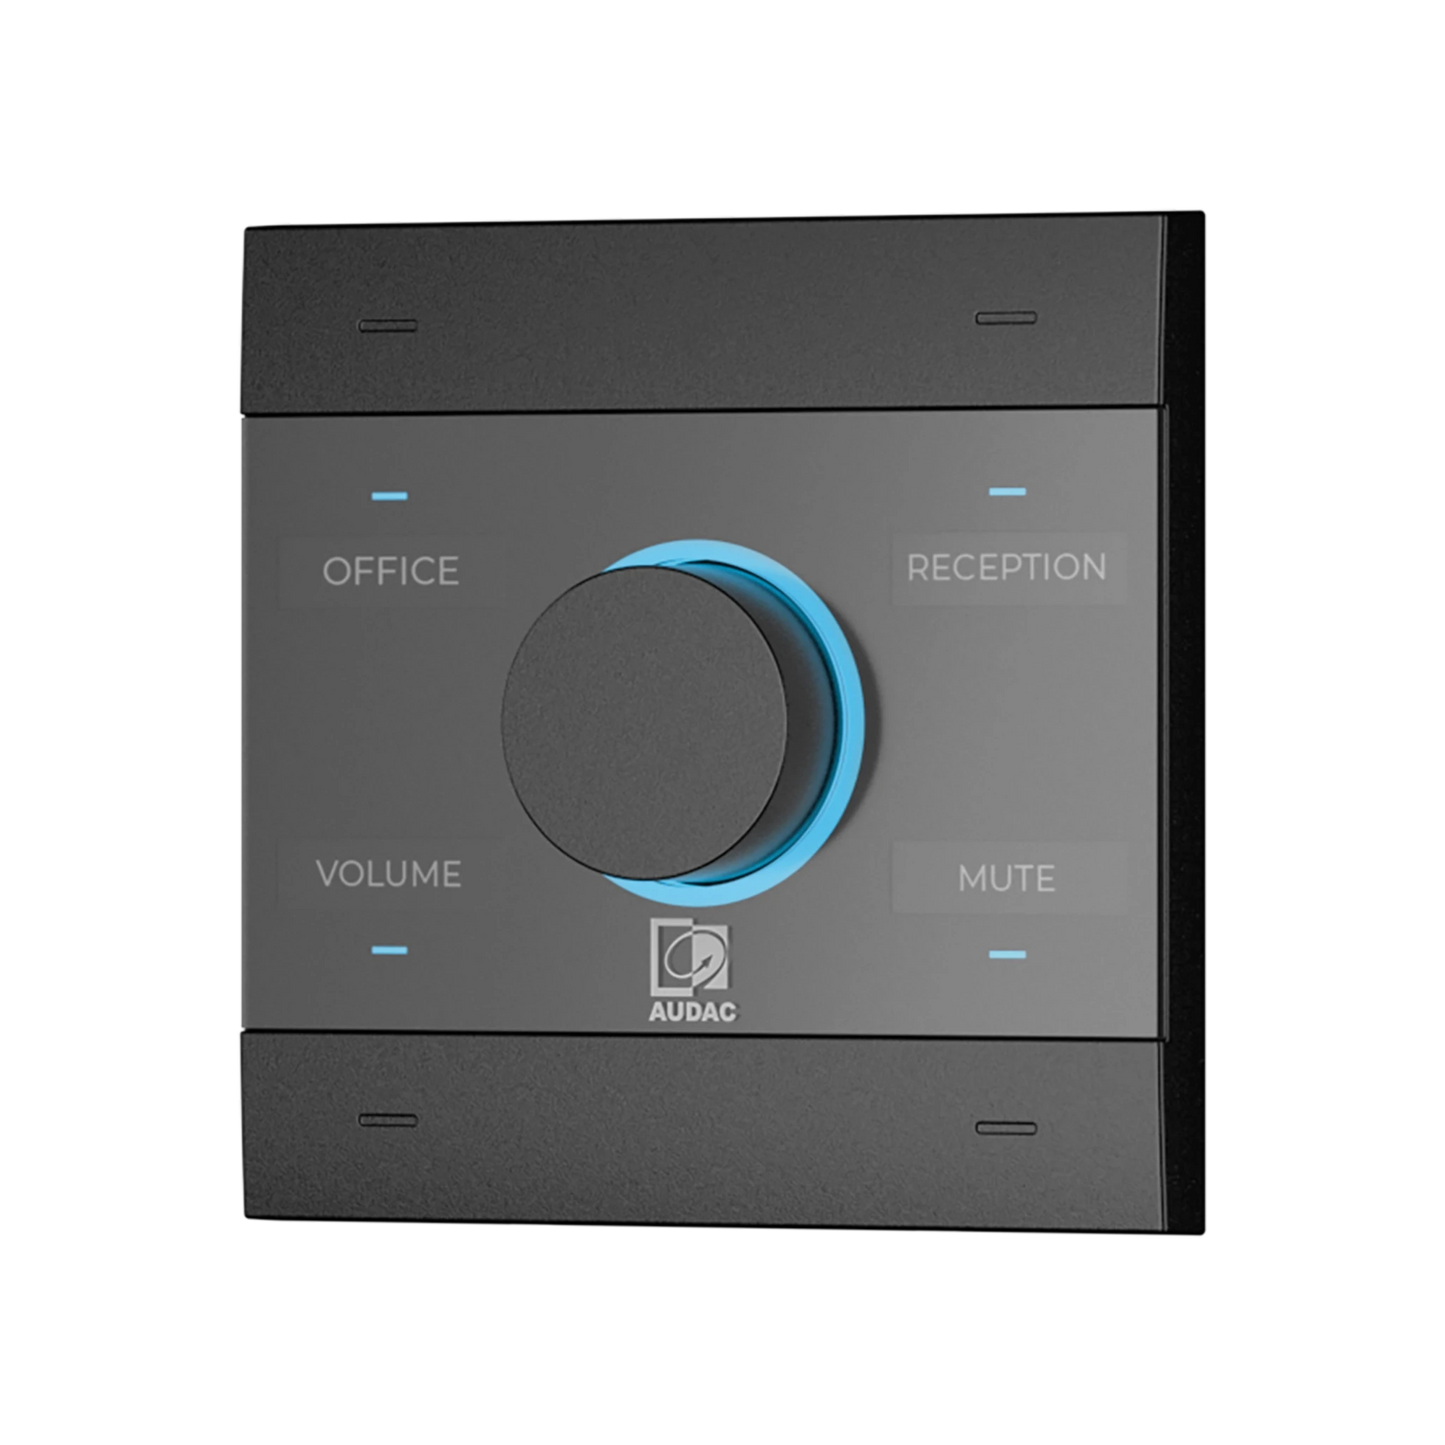 NCP105 Universal network/PoE wall panel controller